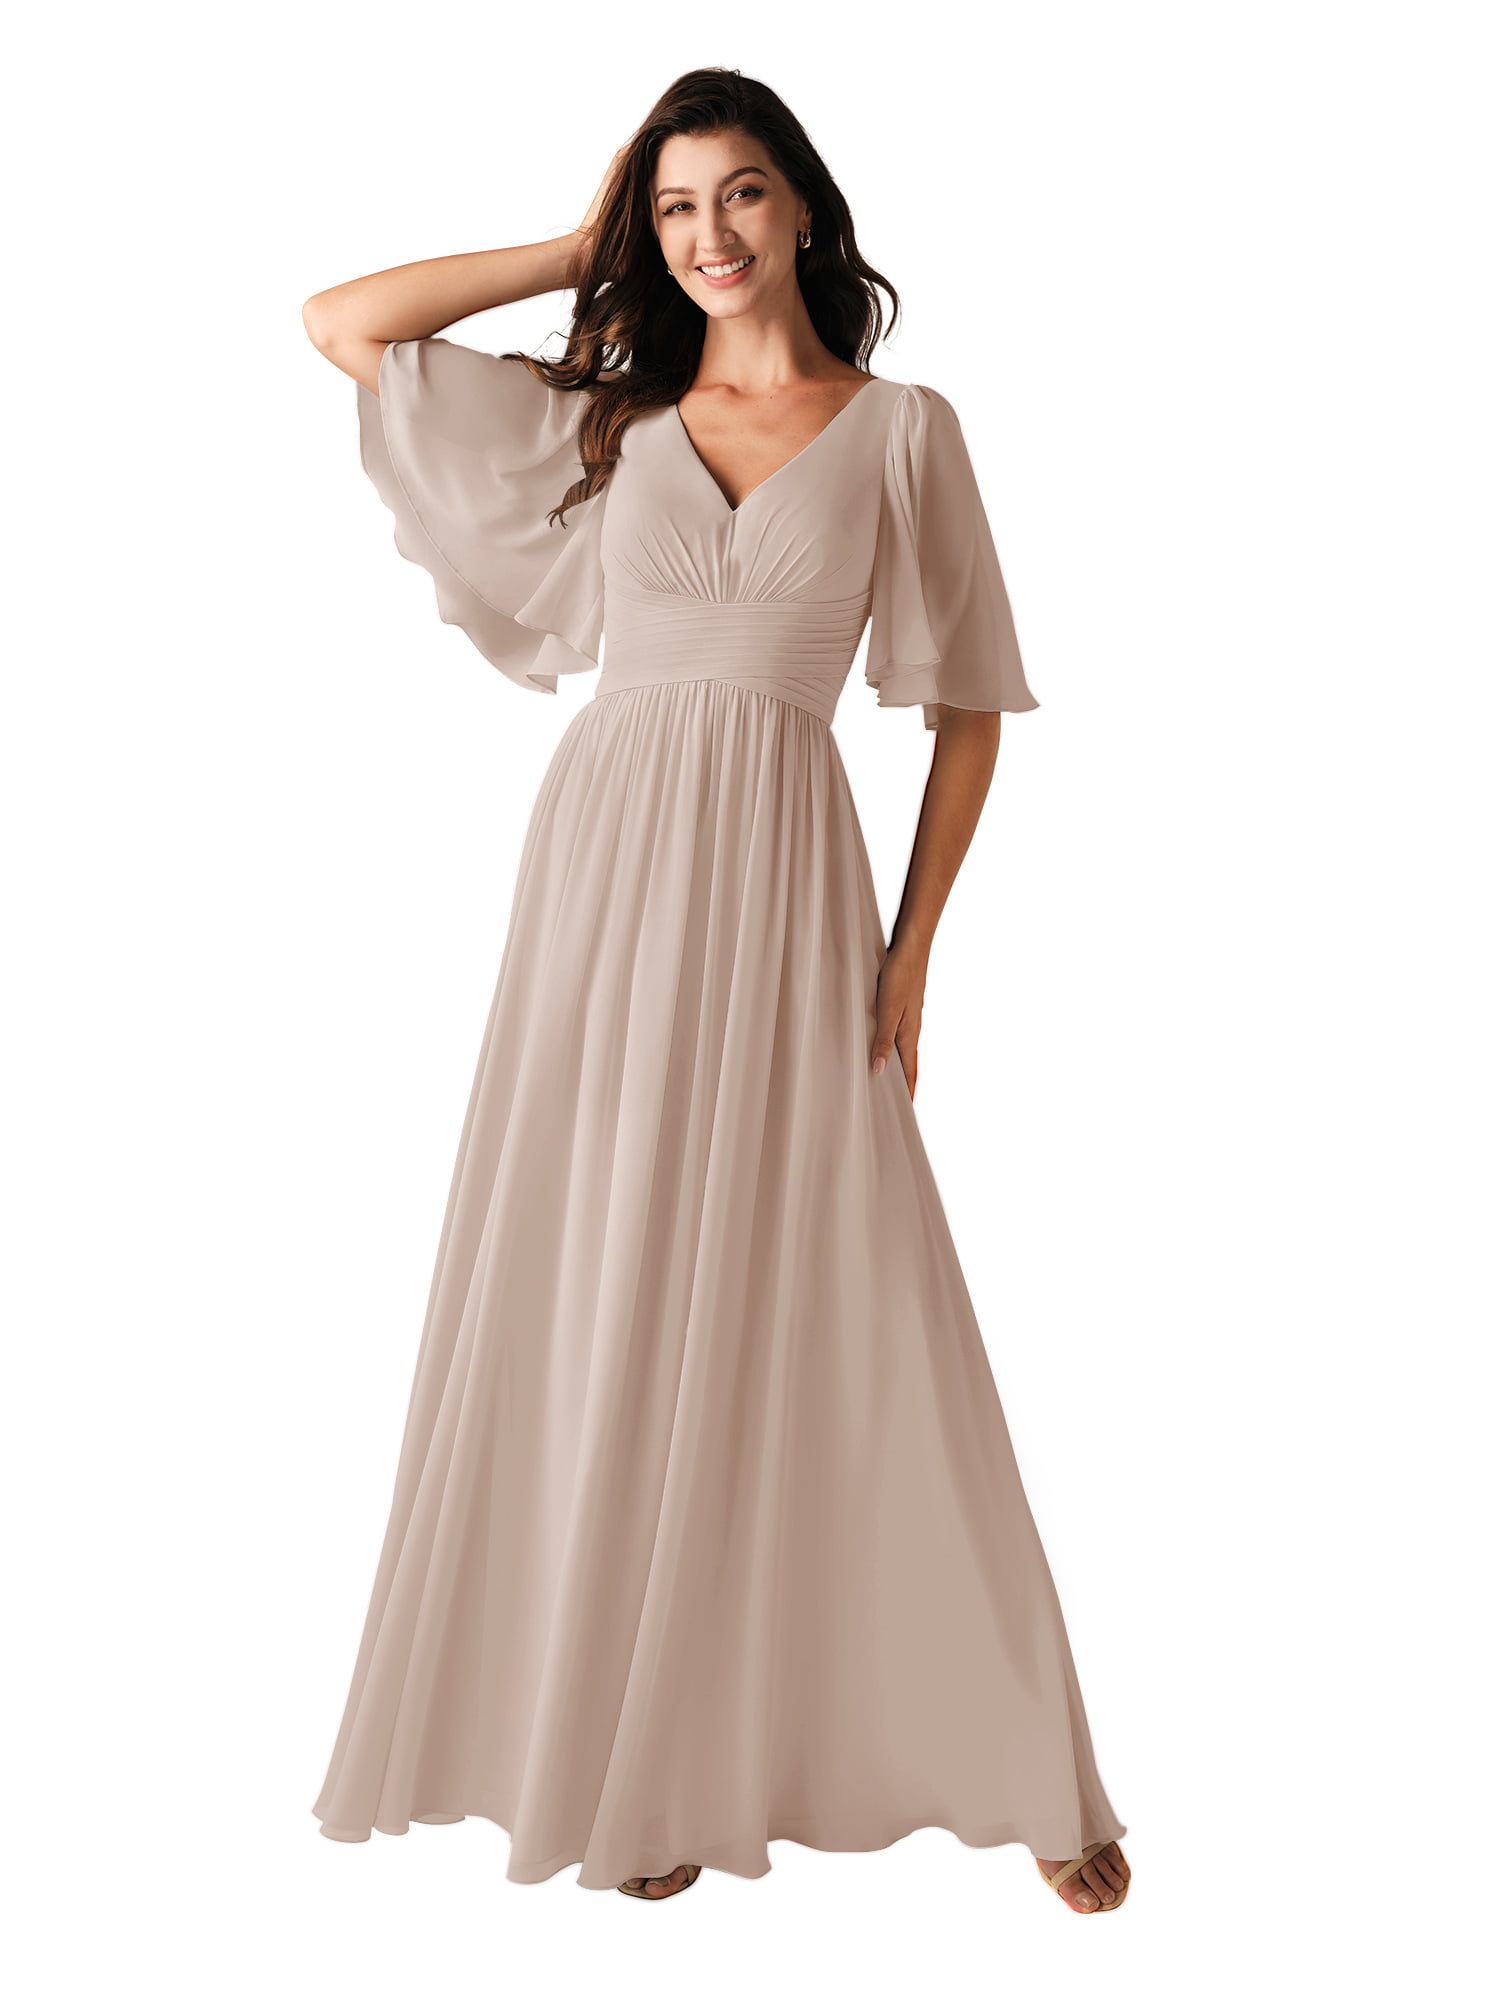 AW BRIDAL Chiffon Long Sleeve Plus Size Bridesmaid Dresses for Party Wedding Formal Prom Maternity Gown